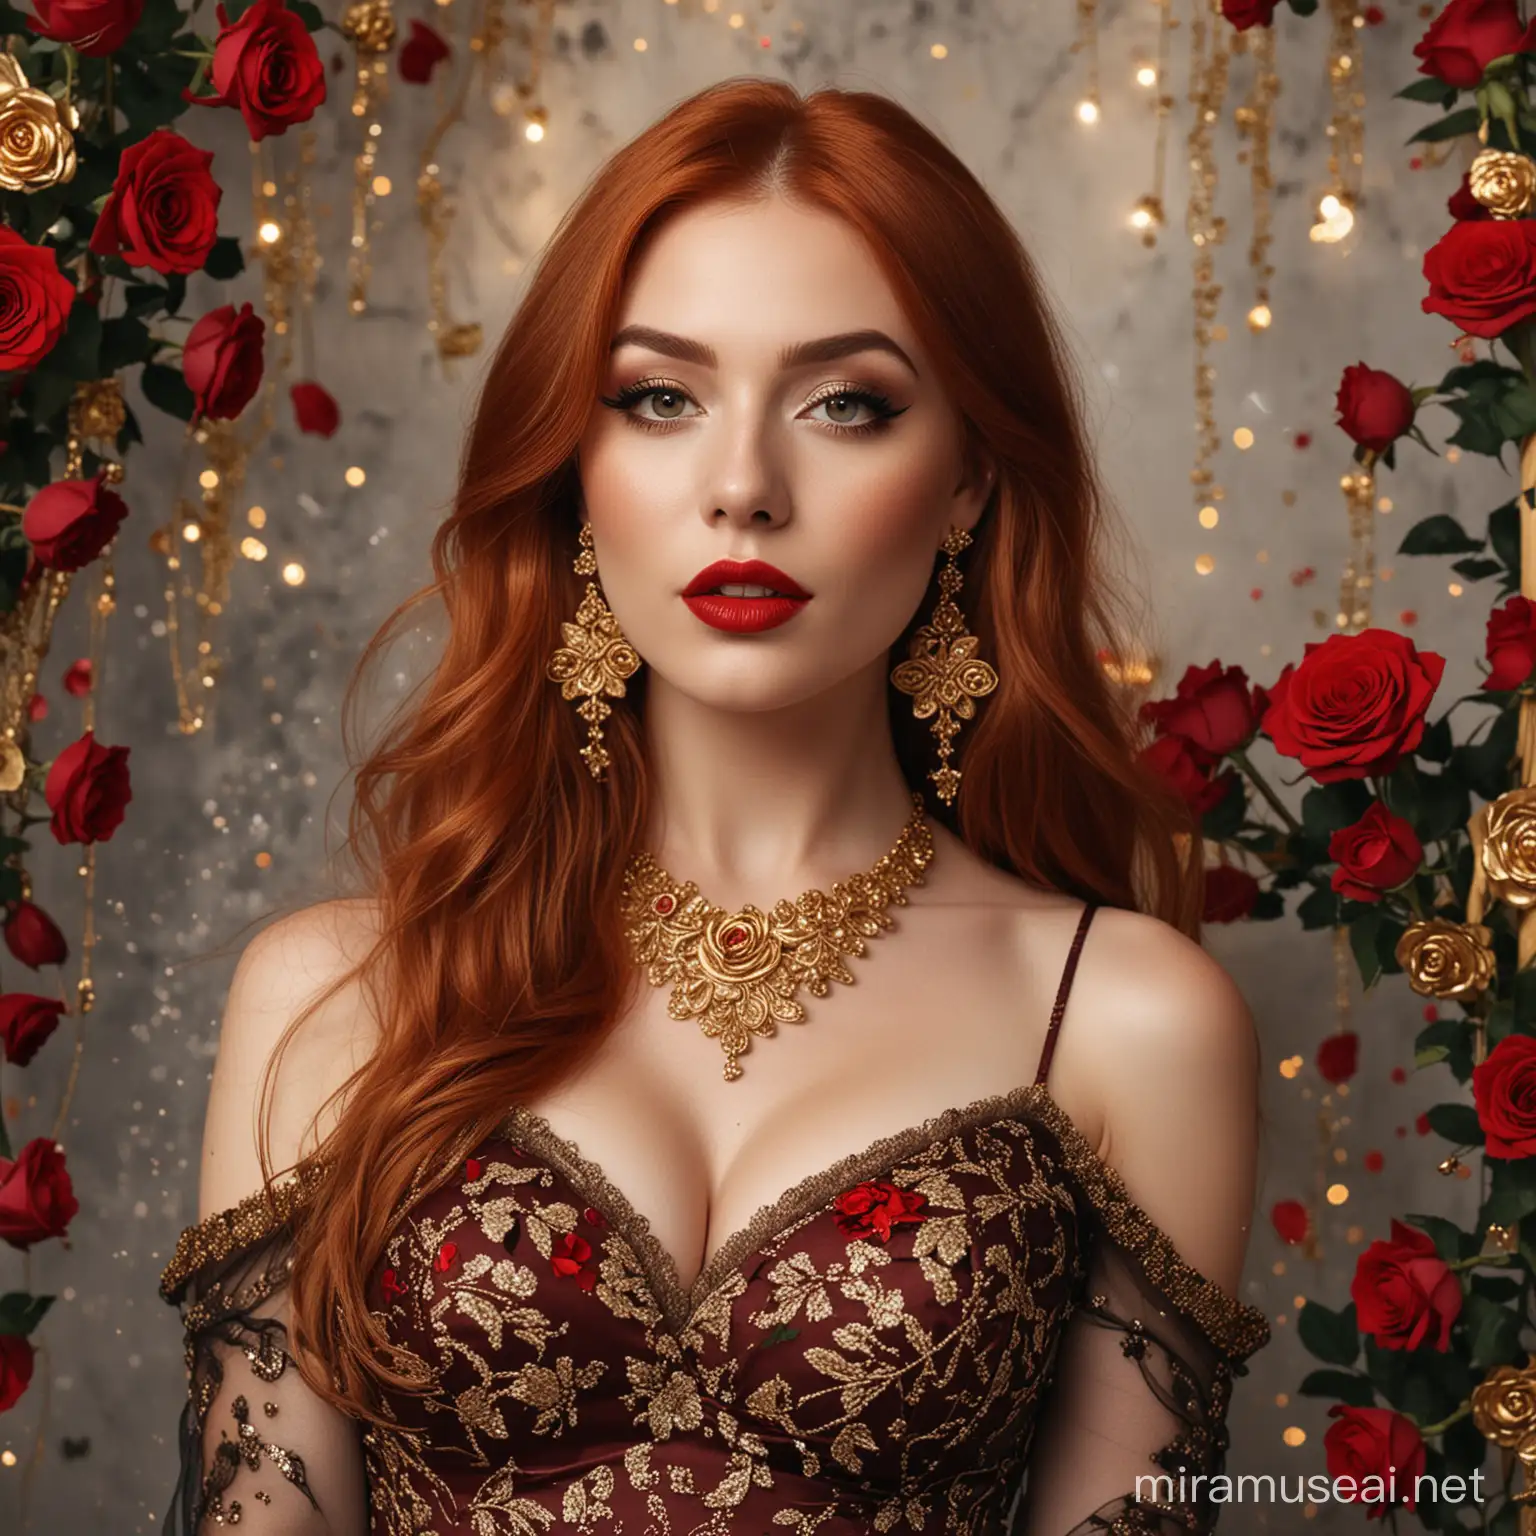 Elegant Redhead in Chocolate Dress Surrounded by Glittering Roses